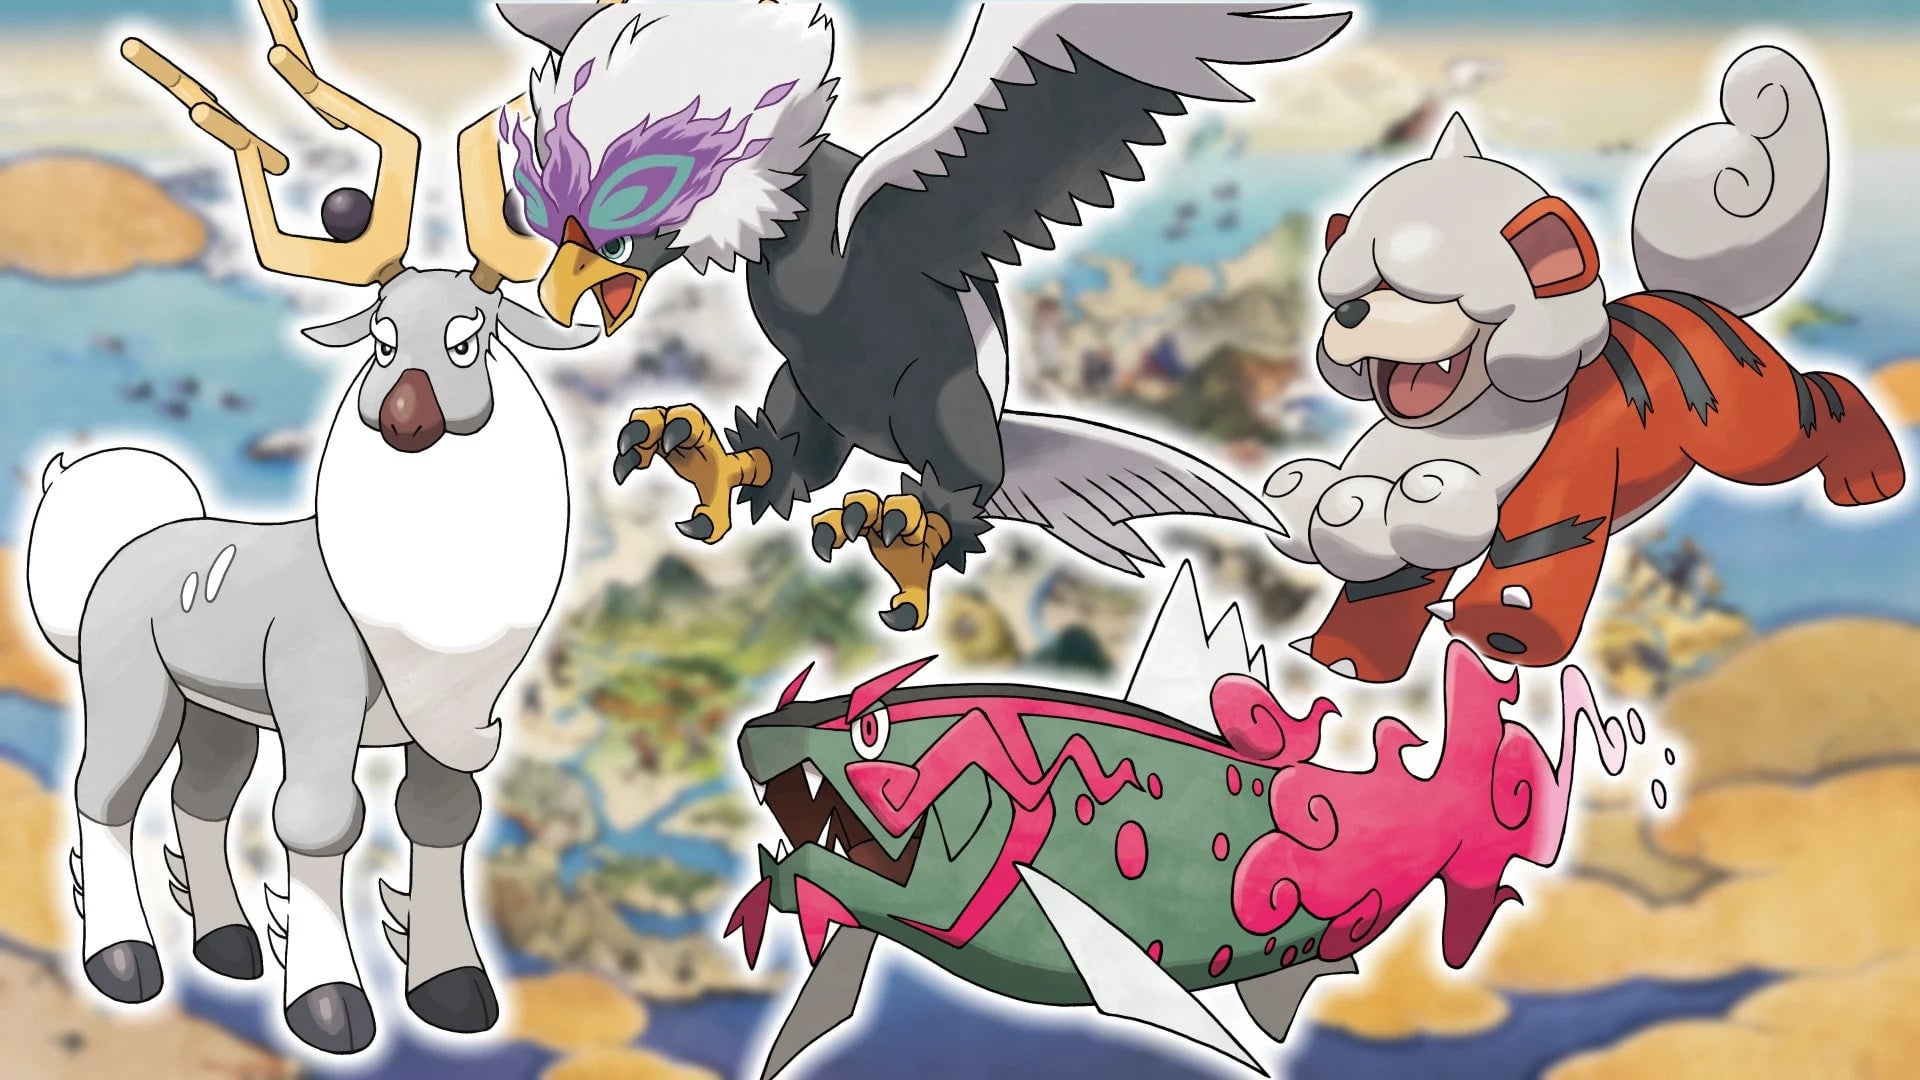 Pokémon Arceus legends: many new features in the extended gameplay trailer